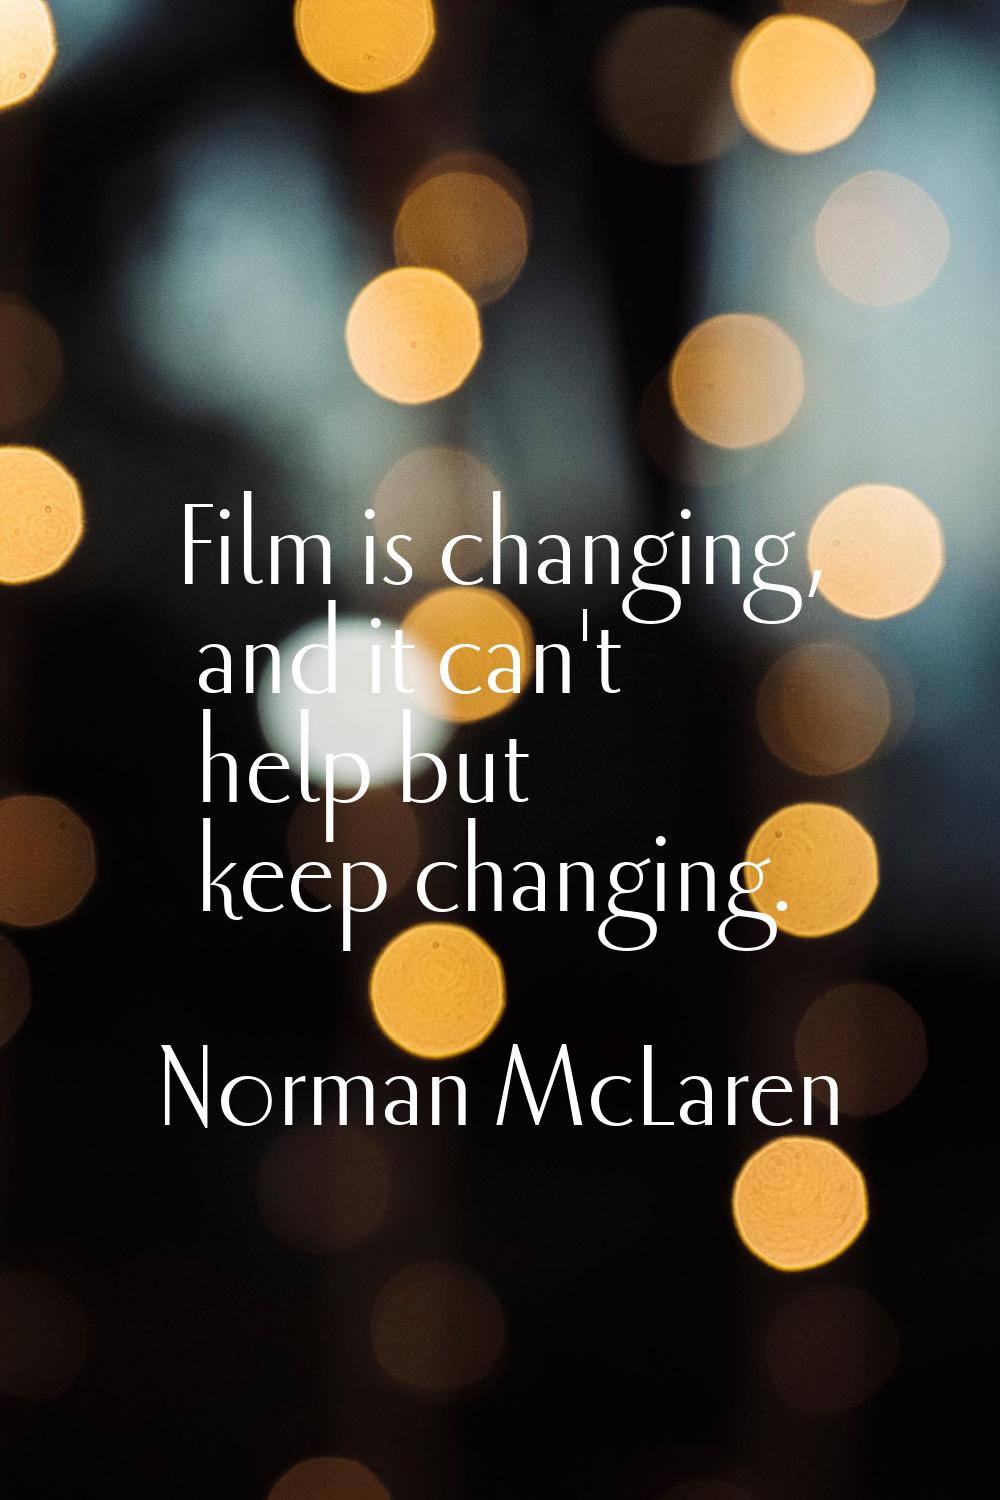 Film is changing, and it can't help but keep changing.